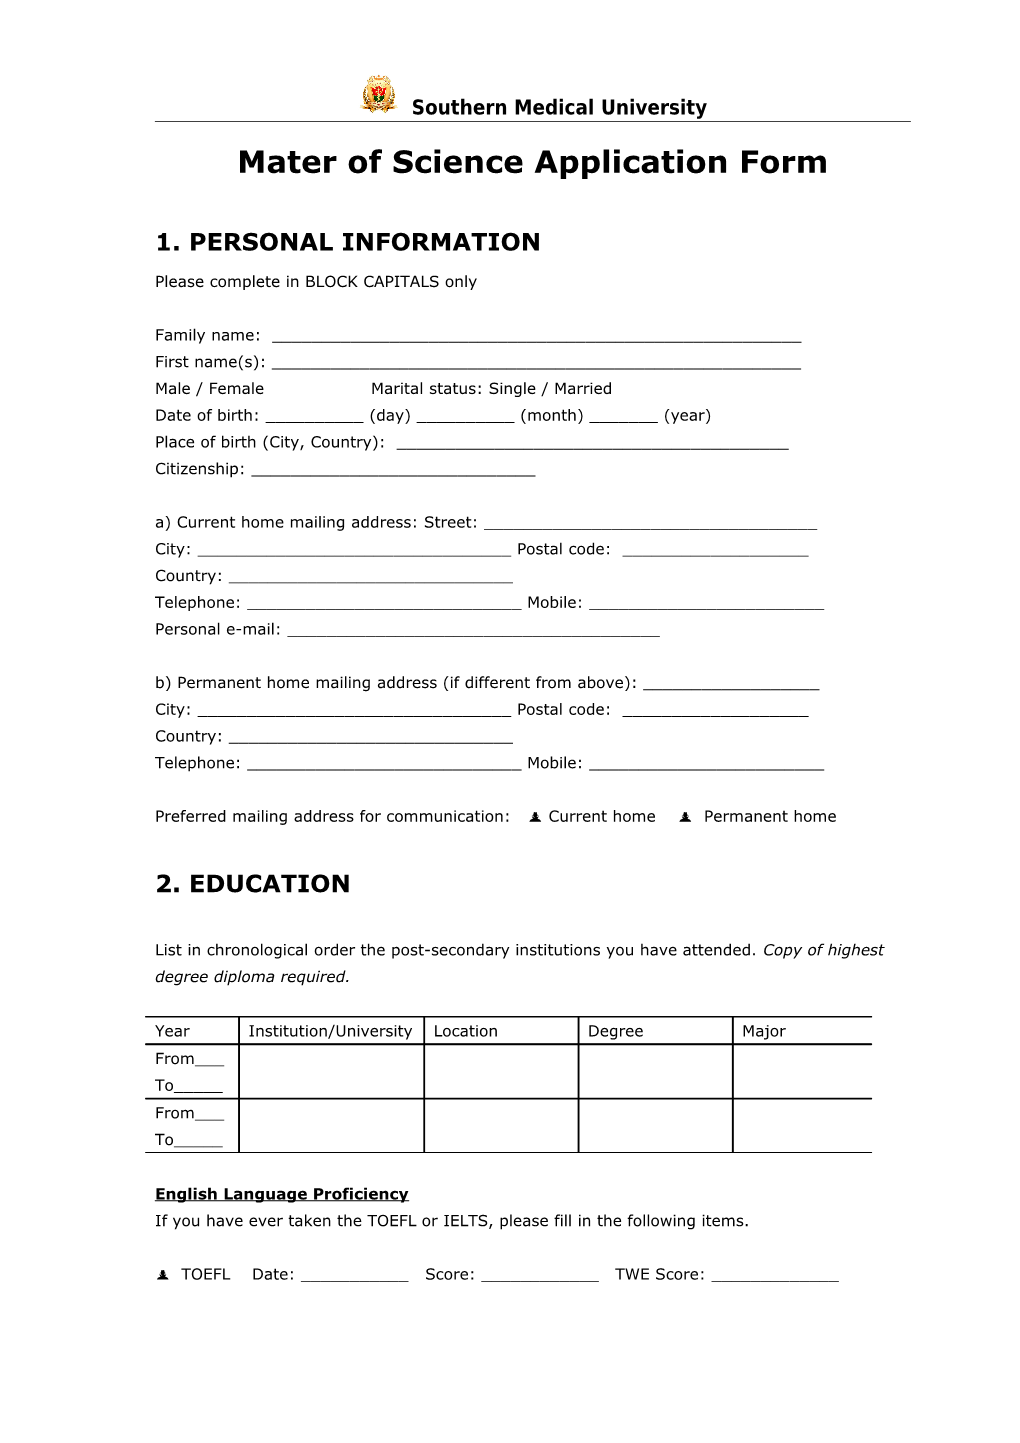 H-MBA Application Form